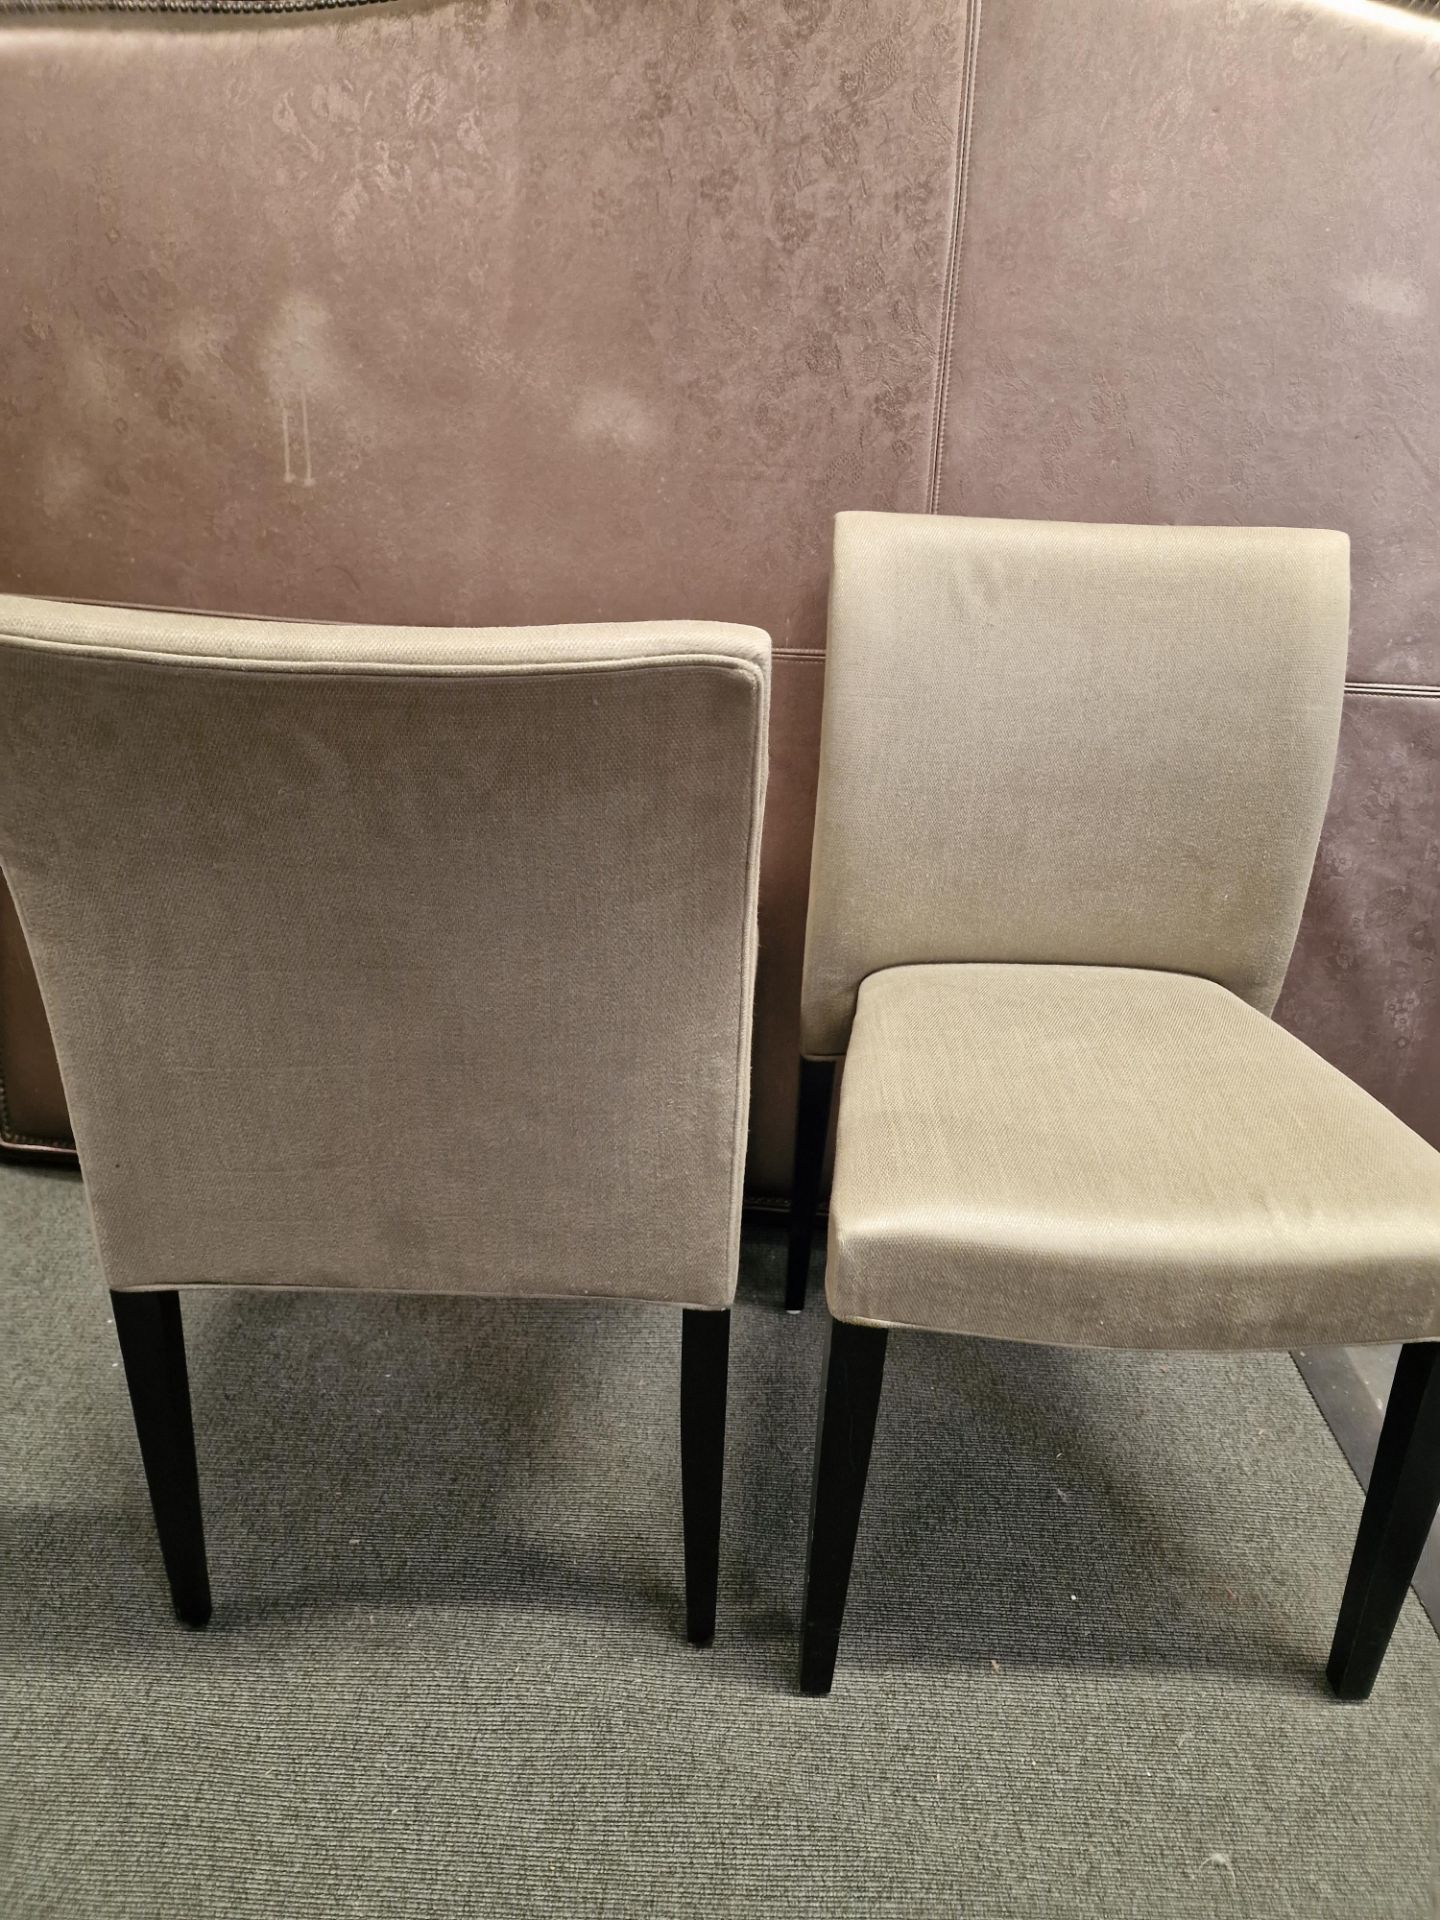 4 x Dining Chairs The linen fabric dining chairs are slightly reclined and have padded backs on - Bild 2 aus 2